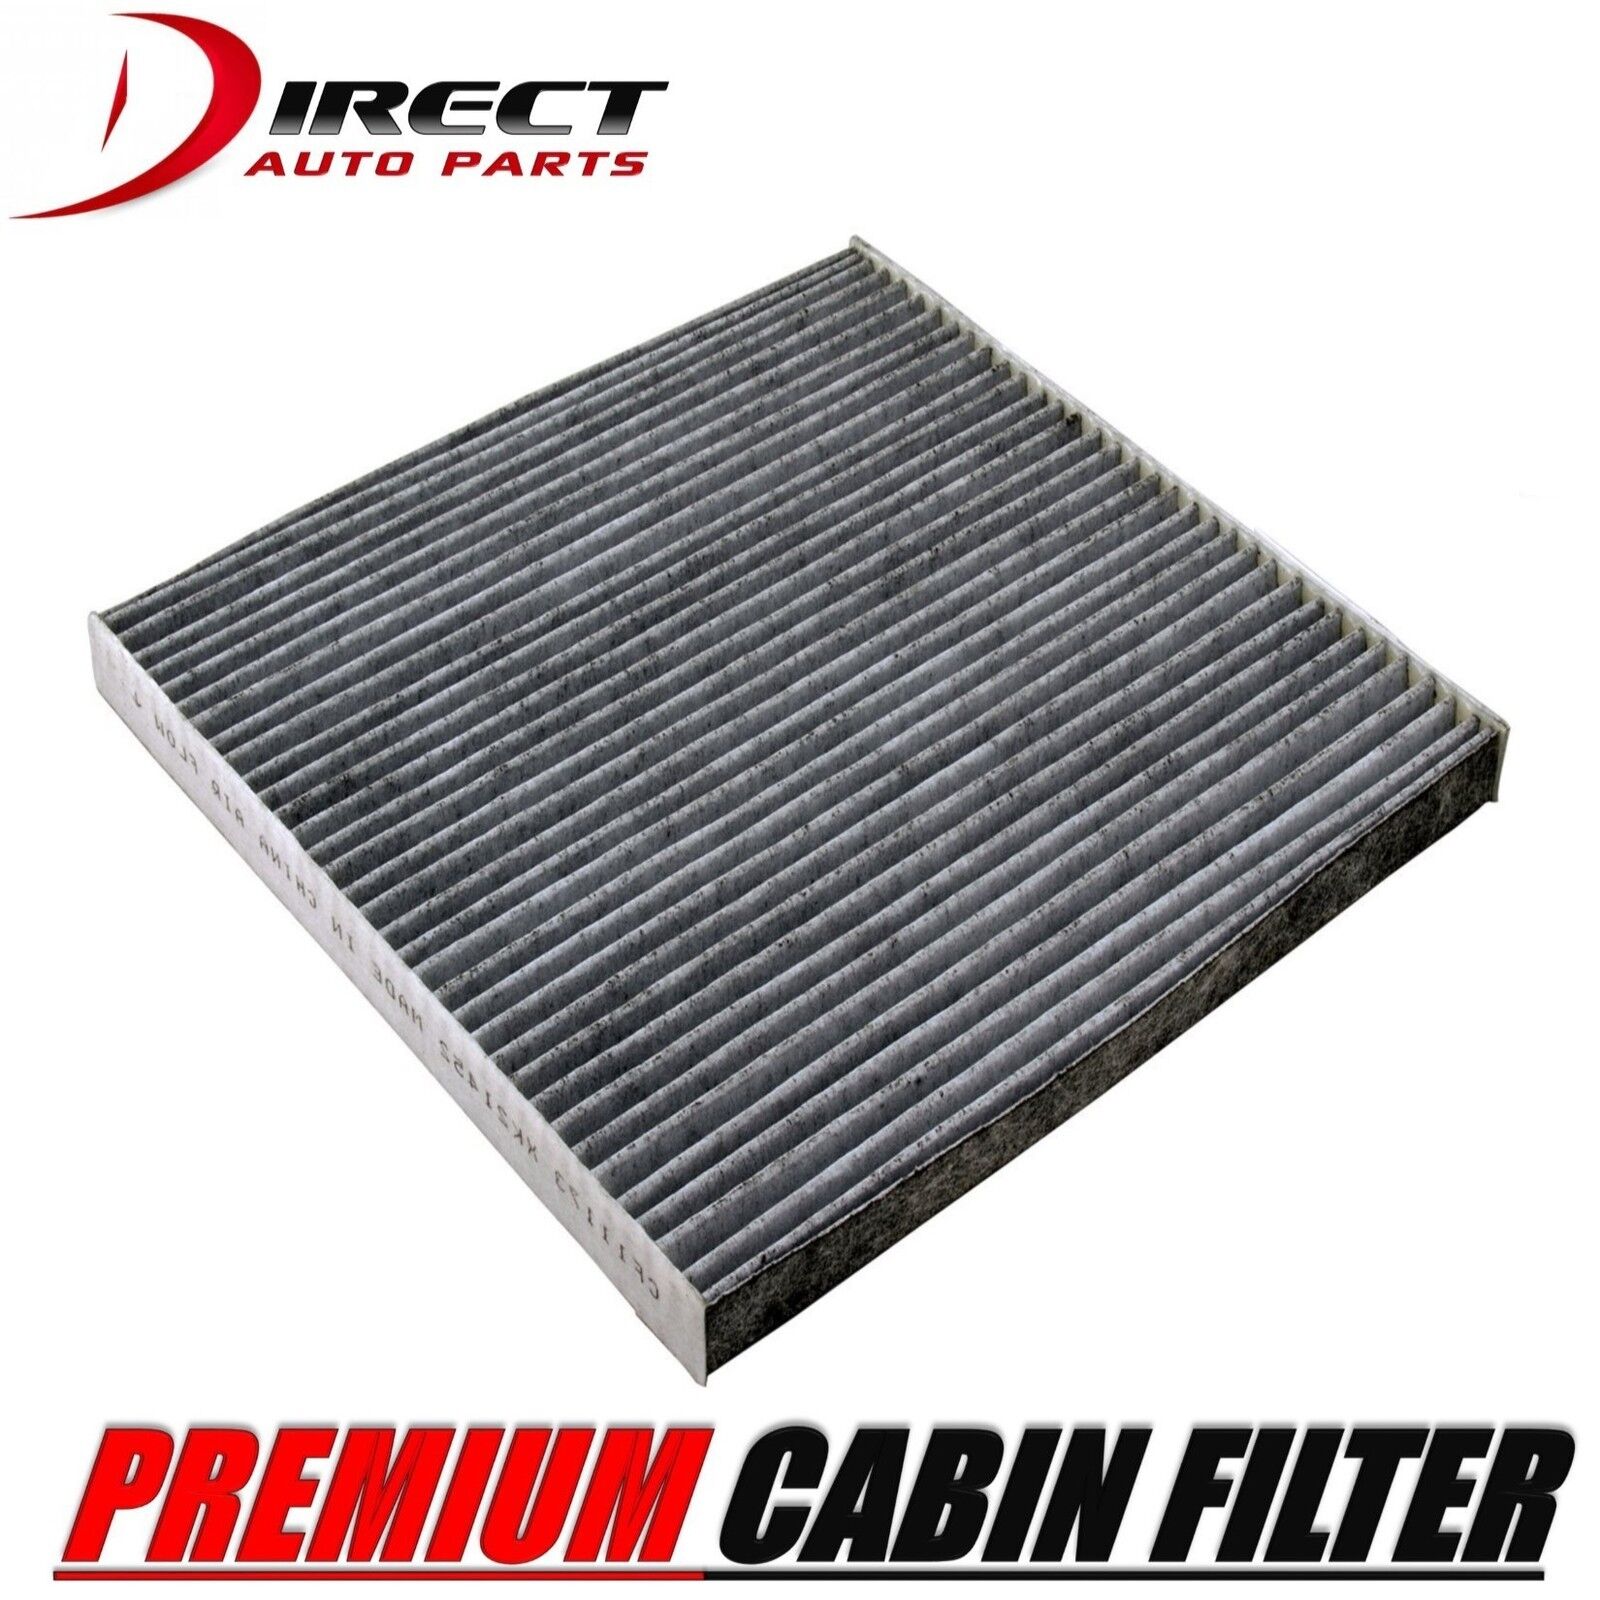 CARBONIZED CABIN AIR FILTER FOR NISSAN MURANO 2003 - 2008